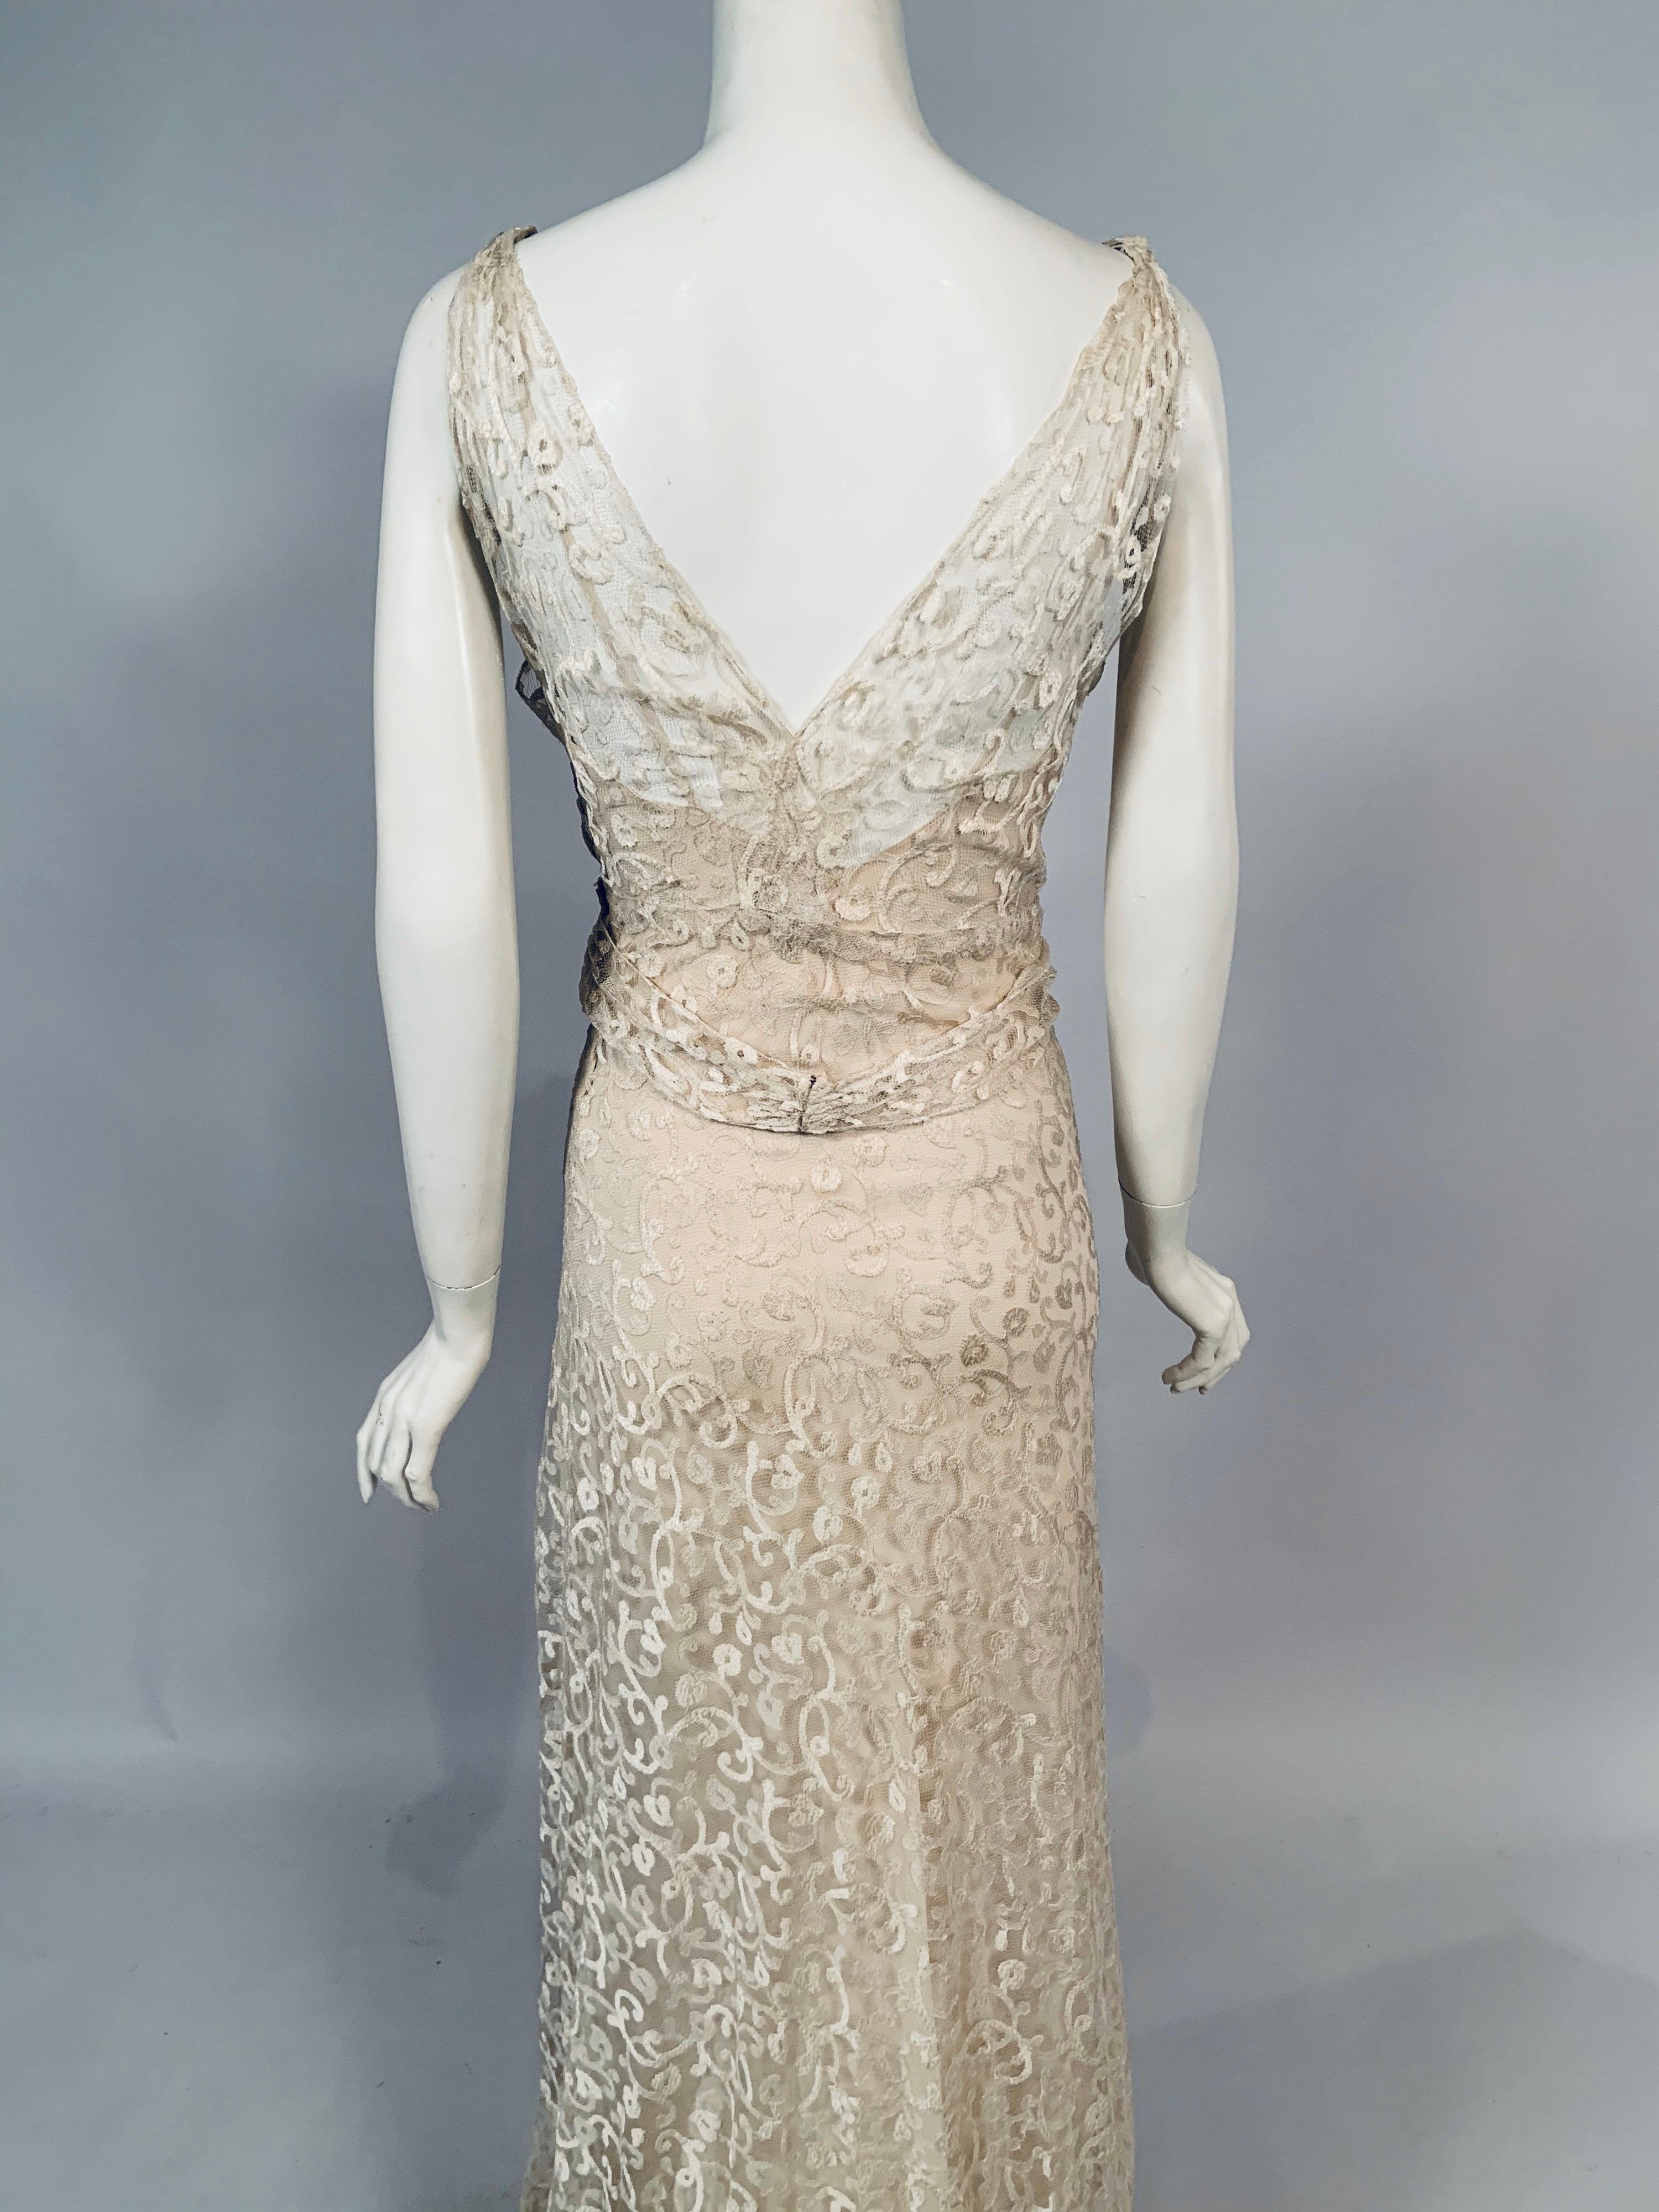 French 1930' Ivory Lace Bias Cut Evening Gown and Chiffon Slip by Bialo, Paris 1